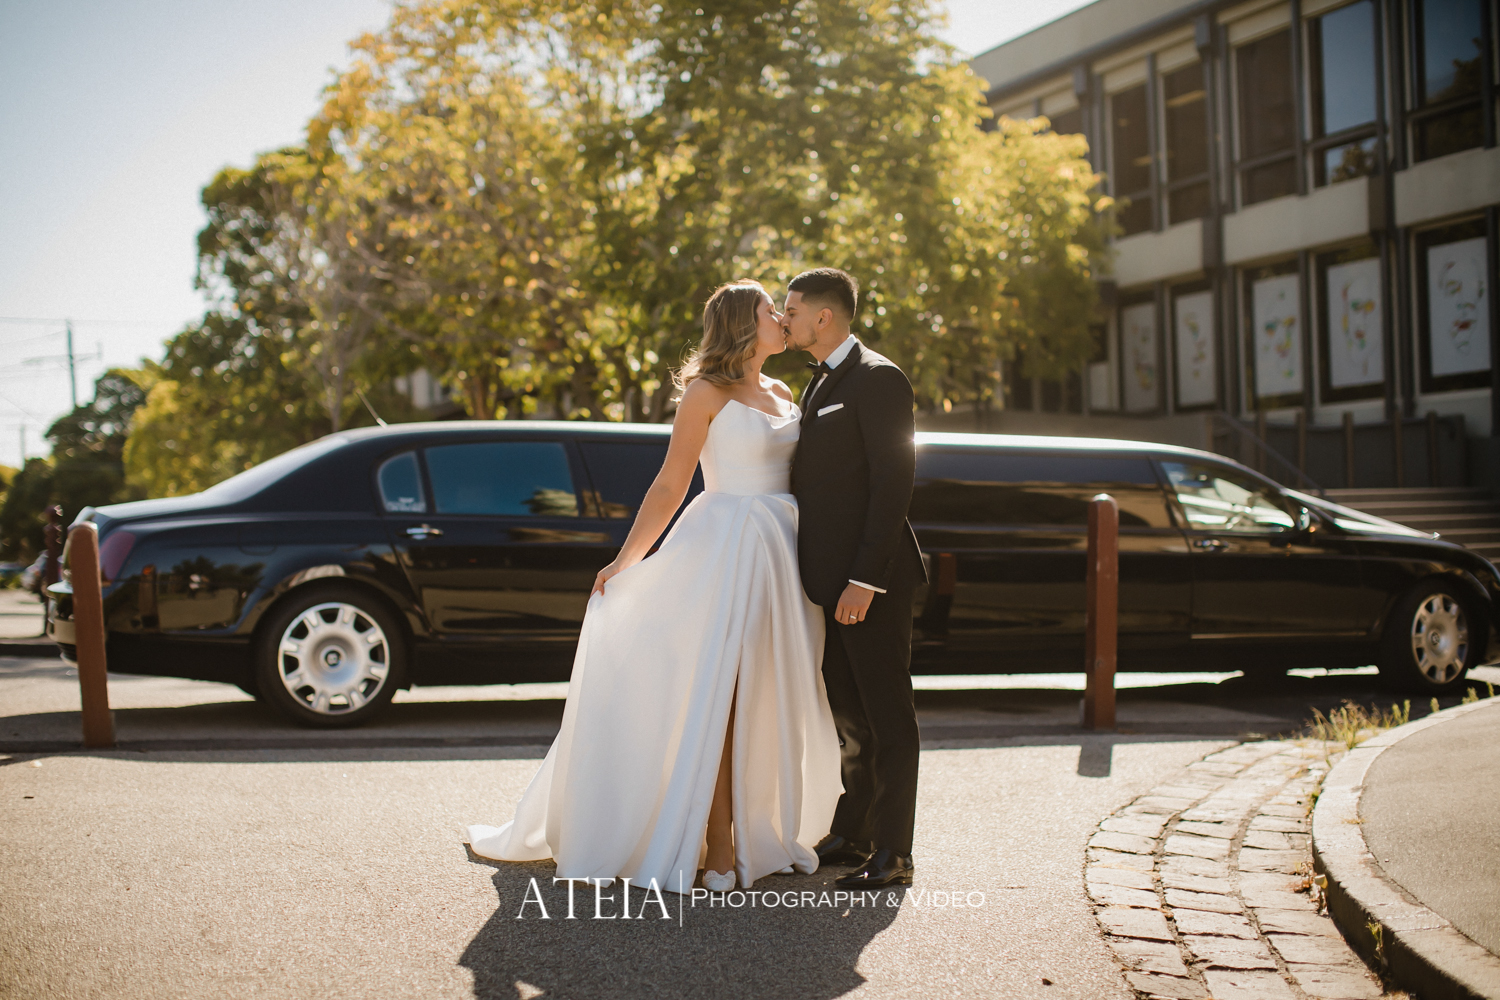 , Stephanie and Ruvi wedding photography at Encore St Kilda in Melbourne